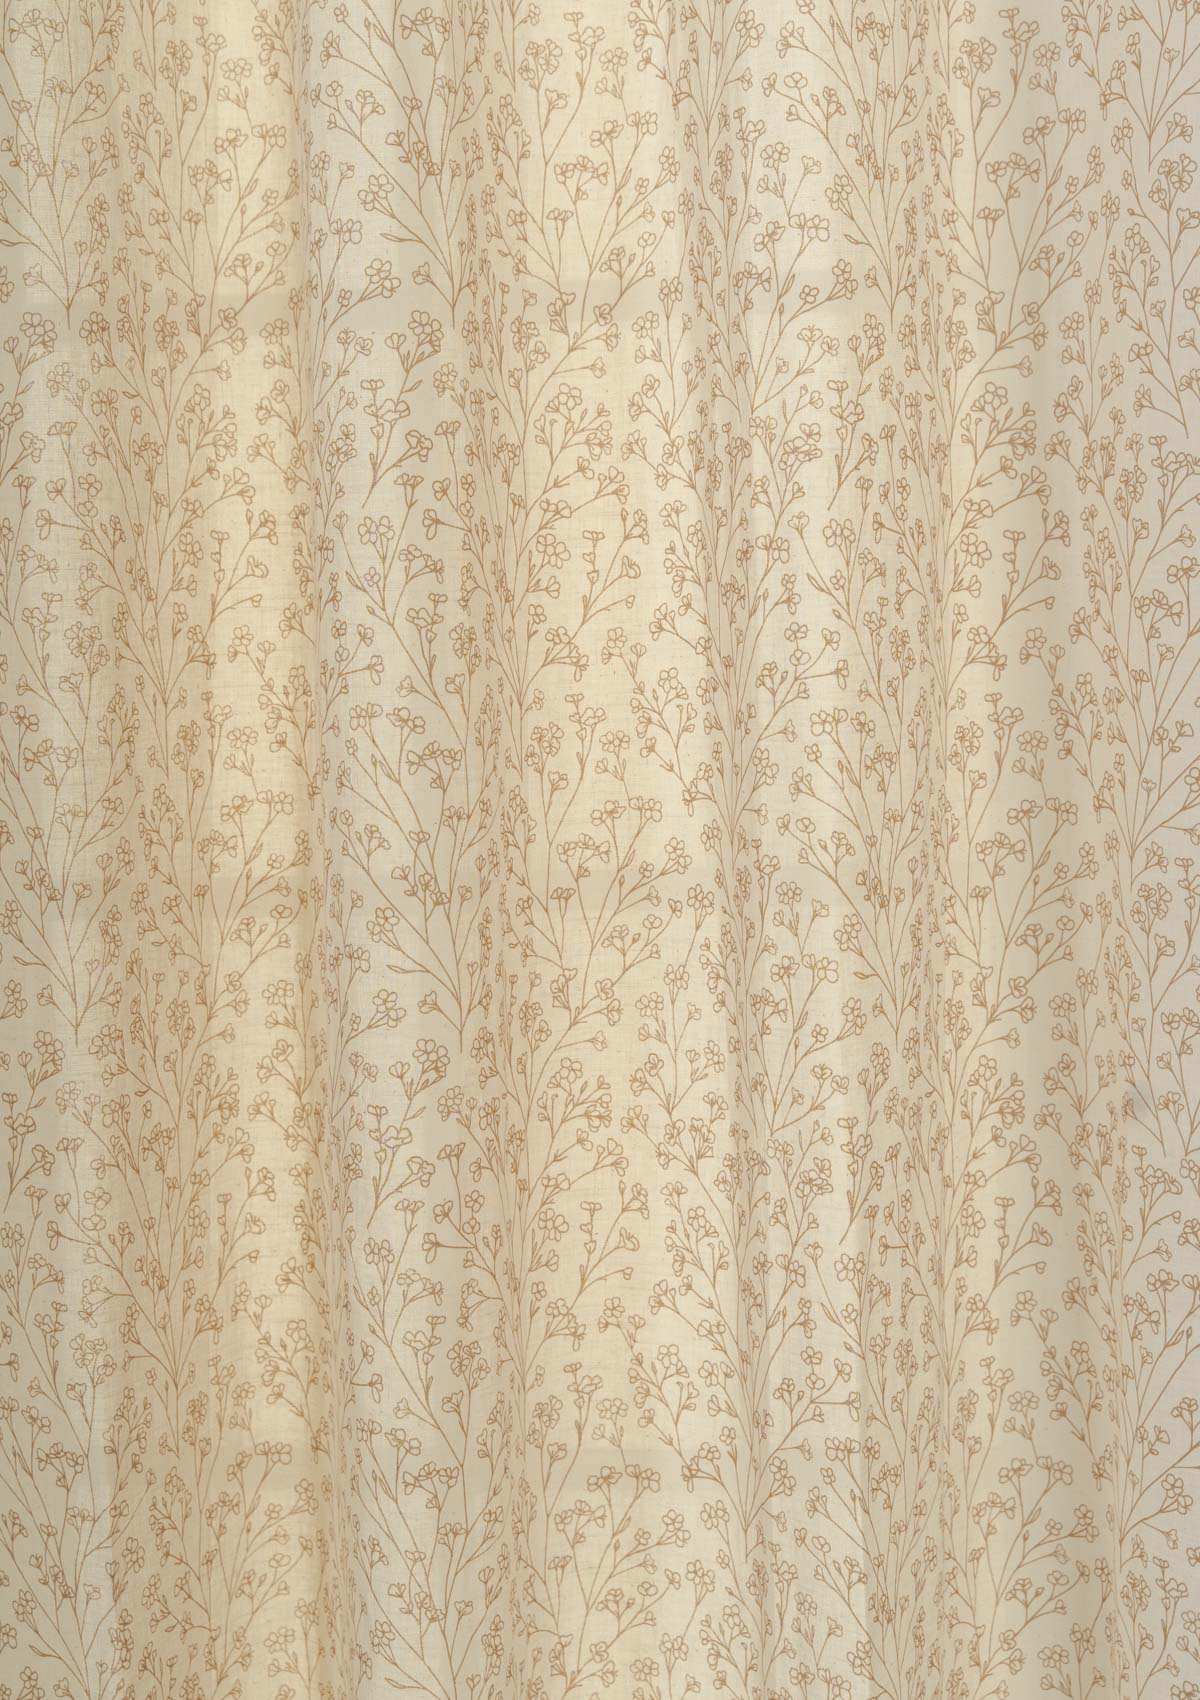 Canopy 100% cotton floral sheer curtain for living room - Light filtering - Brown - Single - Pack of 1